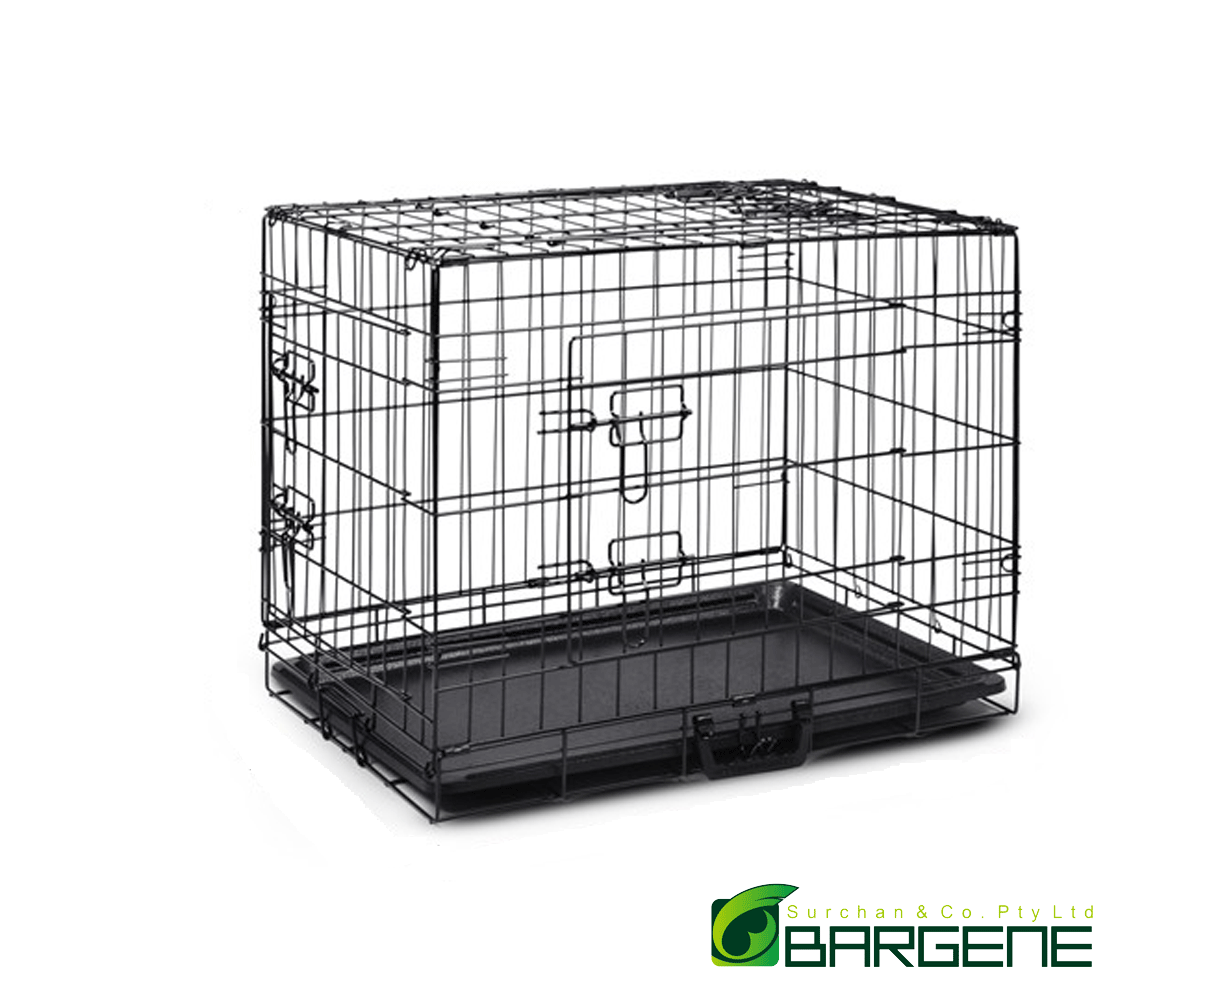 48" Portable Pet Dog Cage Collapsible Metal Crate Kennel